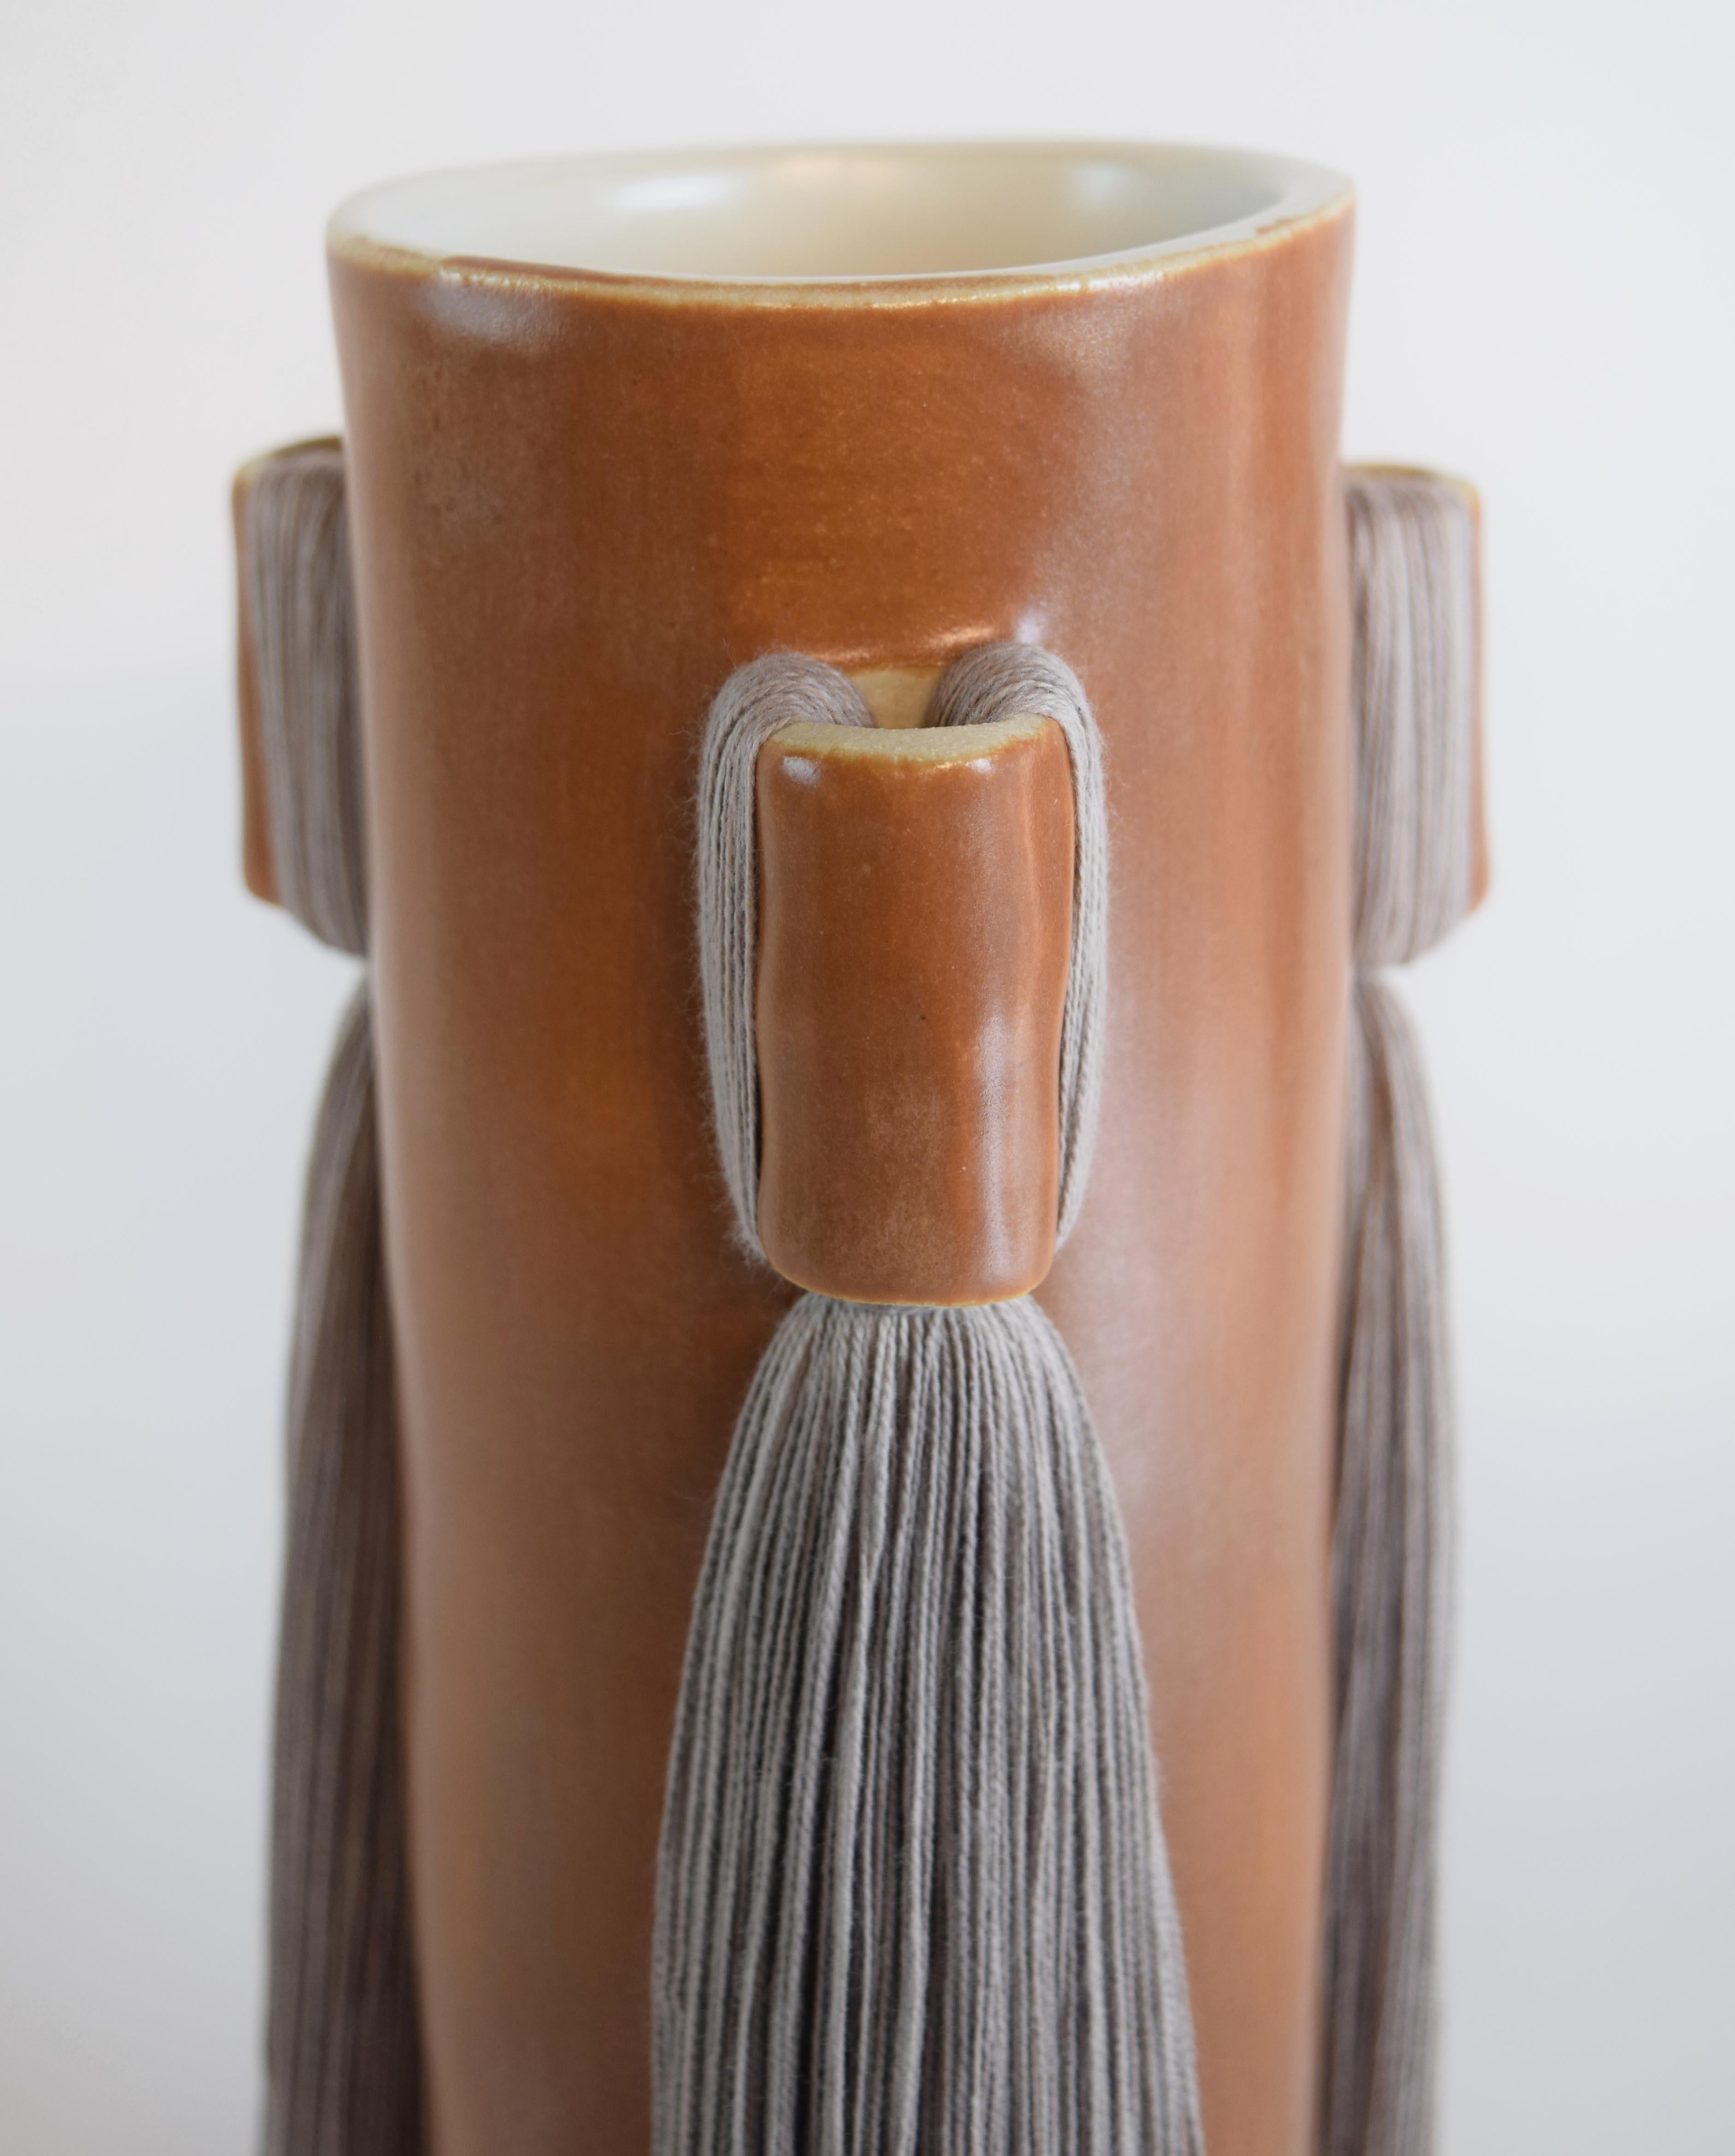 Hand-Crafted Handmade Ceramic Vase #607 in Satin Brown Glaze with Gray Cotton Fringe Detail For Sale